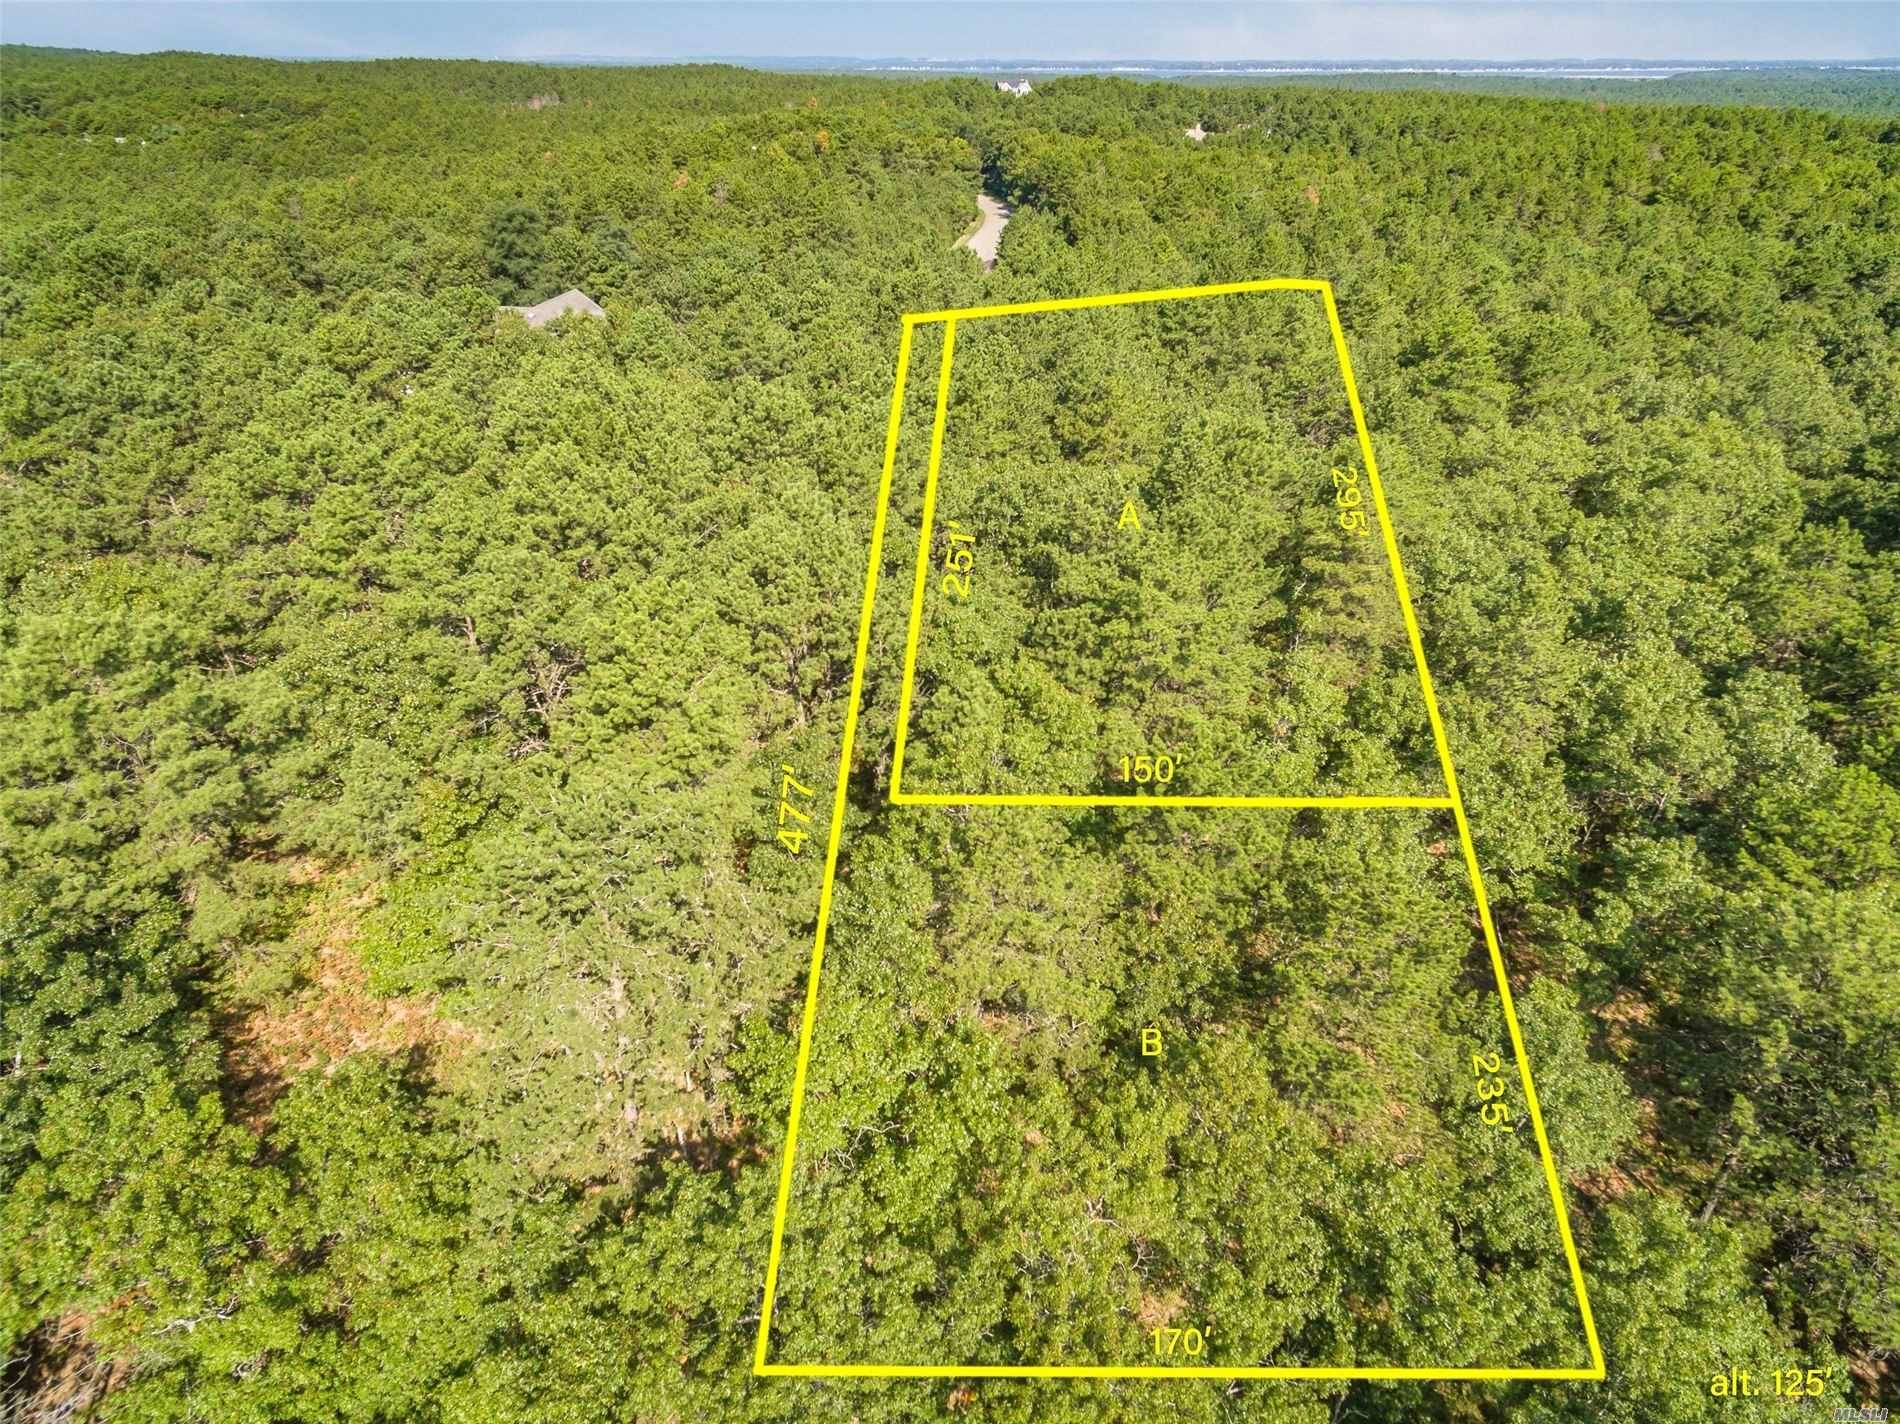 SOUTHAMPTON PINES.. BUILDABLE 1 ACRE LOT ON ONE OF THE HIGHEST POINTS IN SOUTHAMPTON PINES.